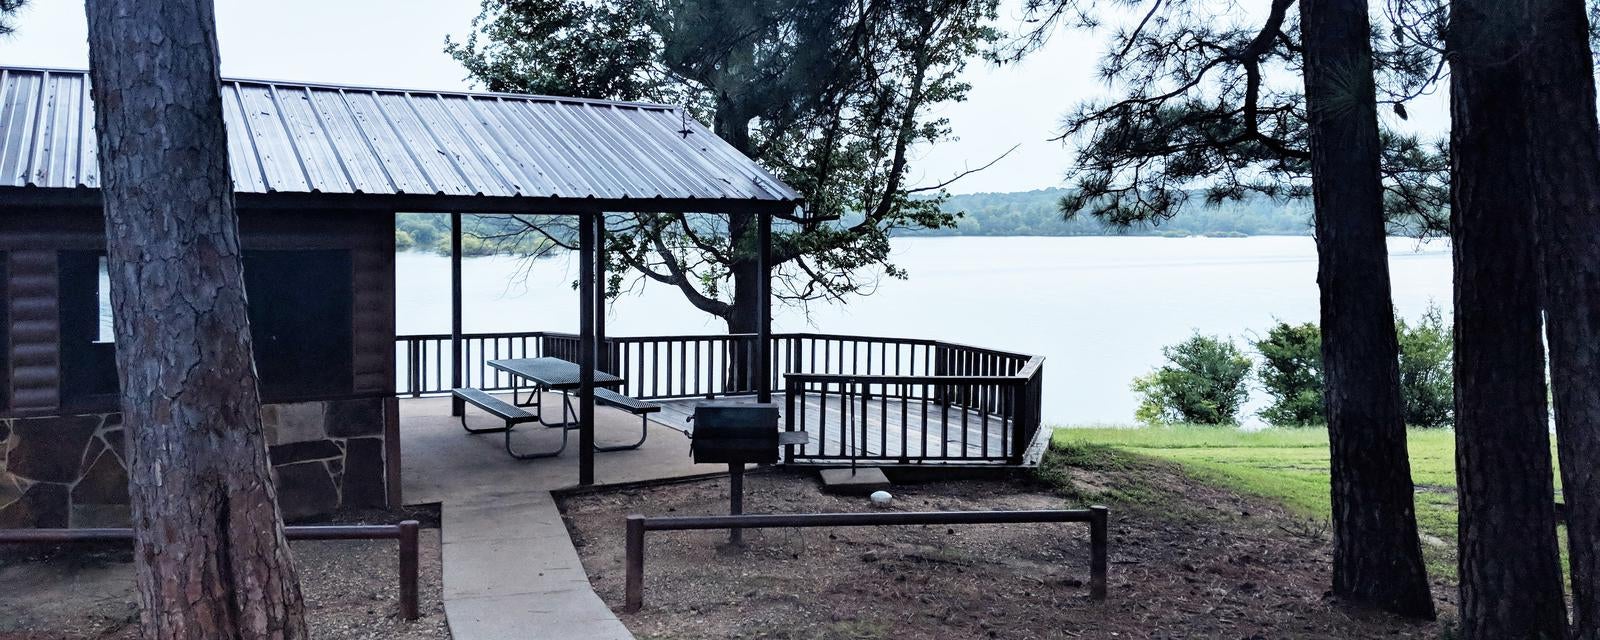 Screened shelter in Clear Springs Campground overlooking Wright Patman Lake.



Credit: